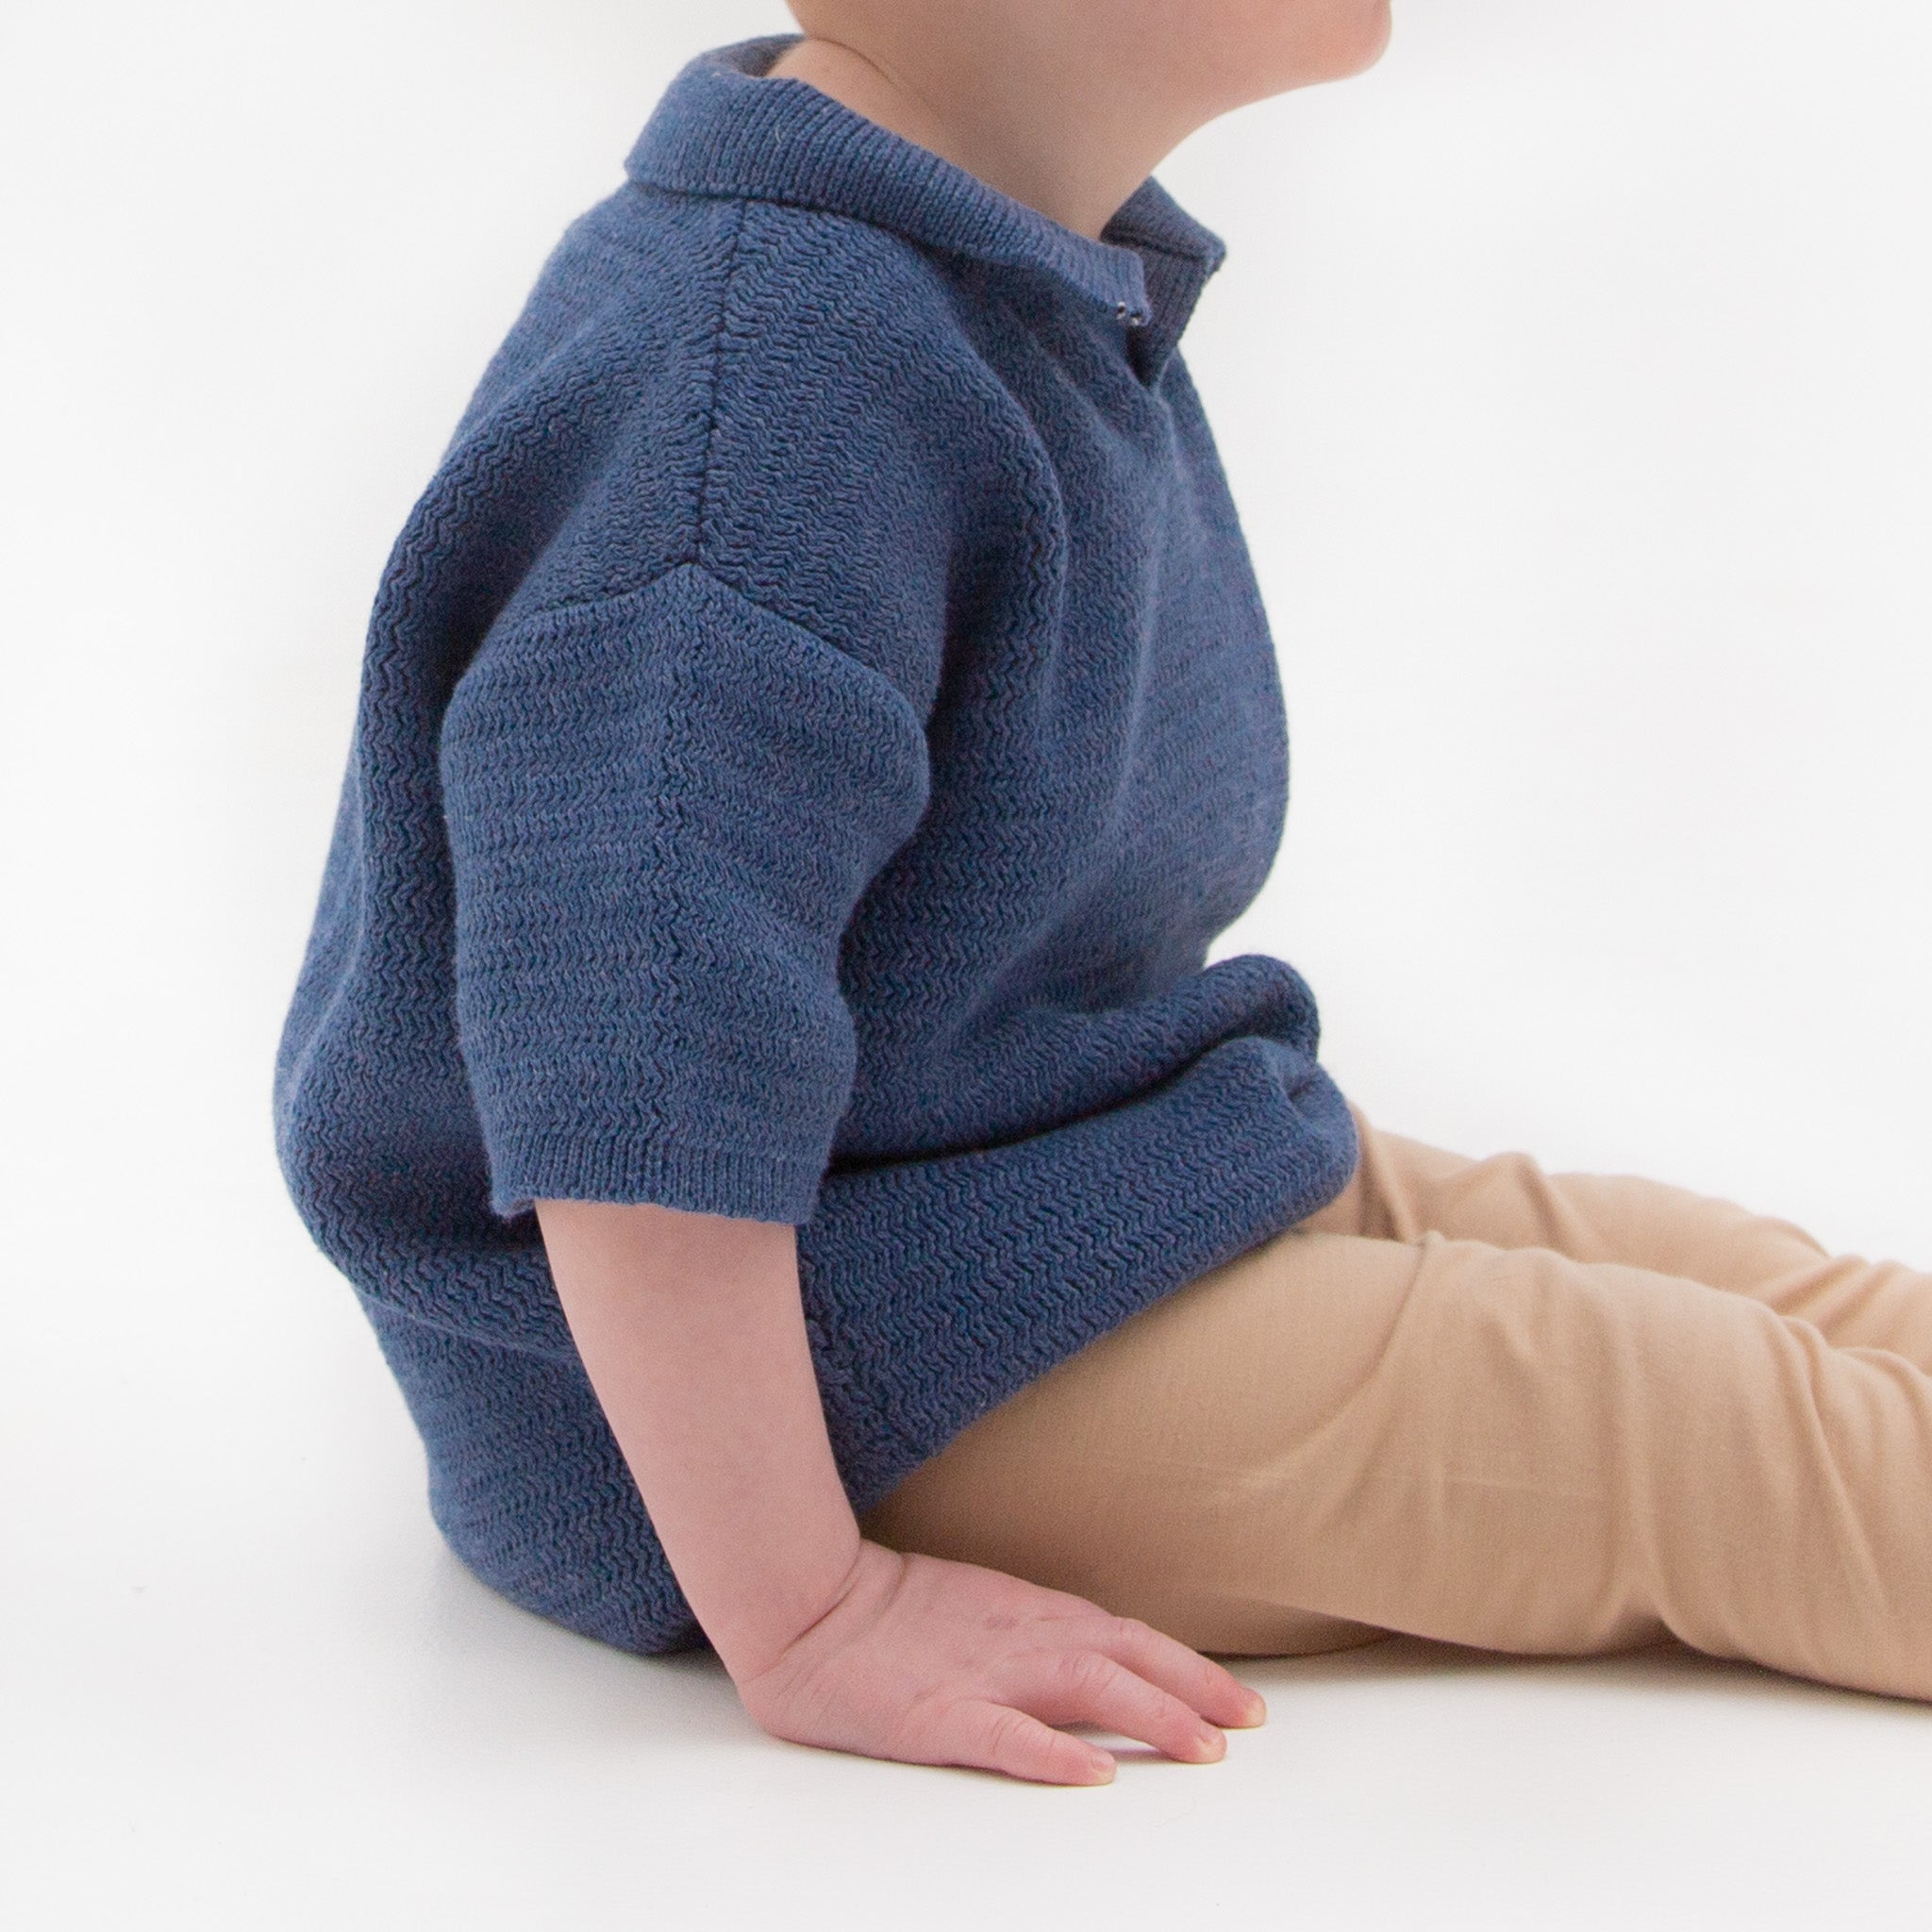 Babies and children knit polo - Navy